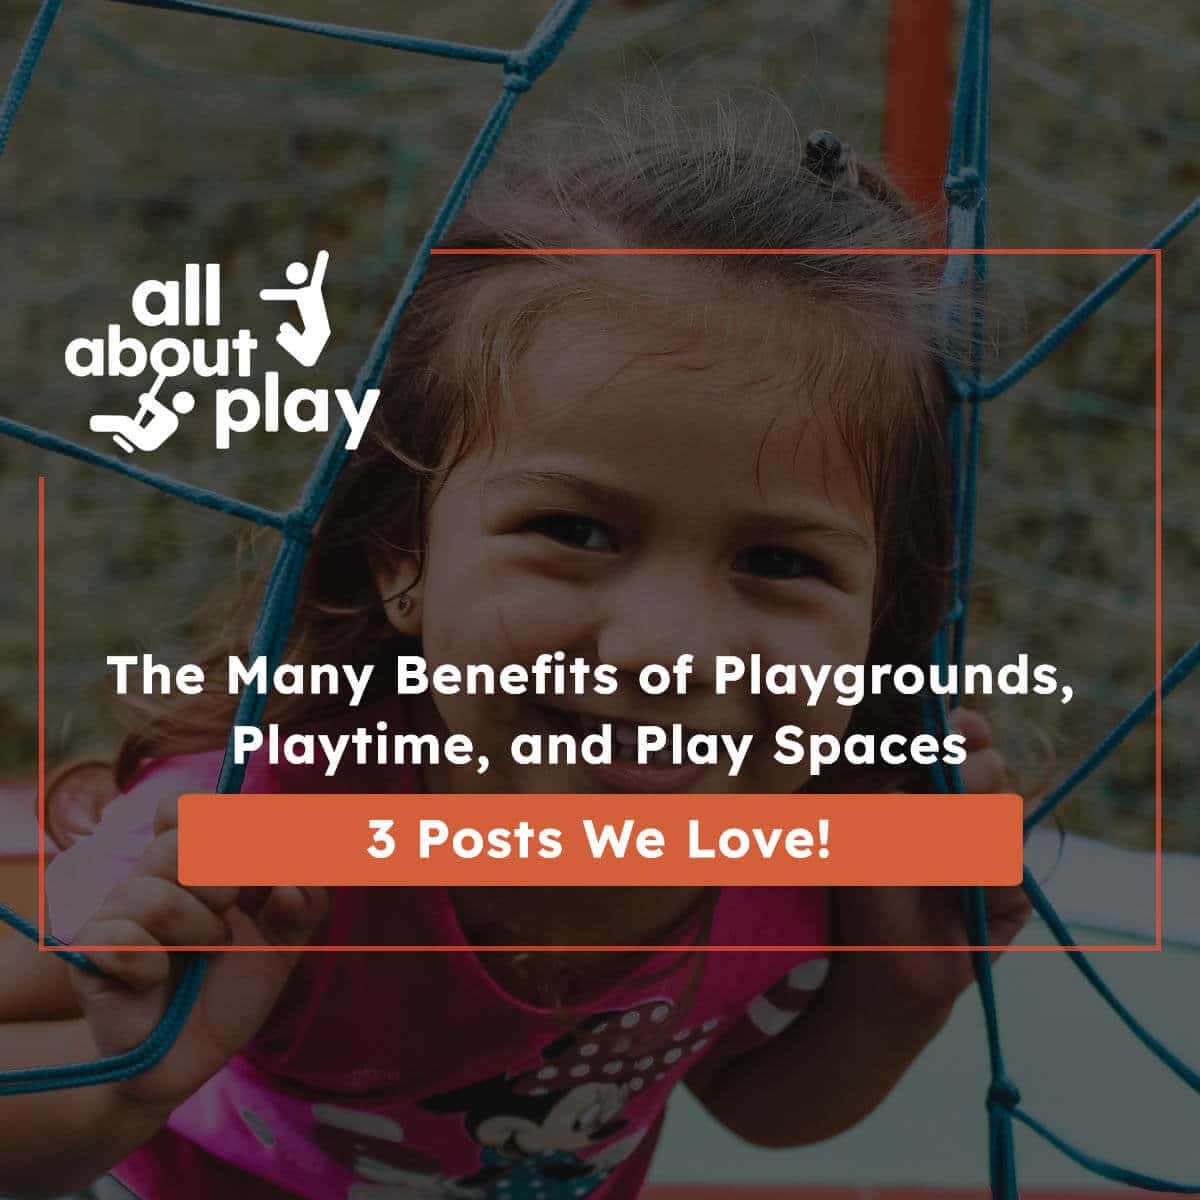 Benefits of Playgrounds, Playtime, and Play Spaces